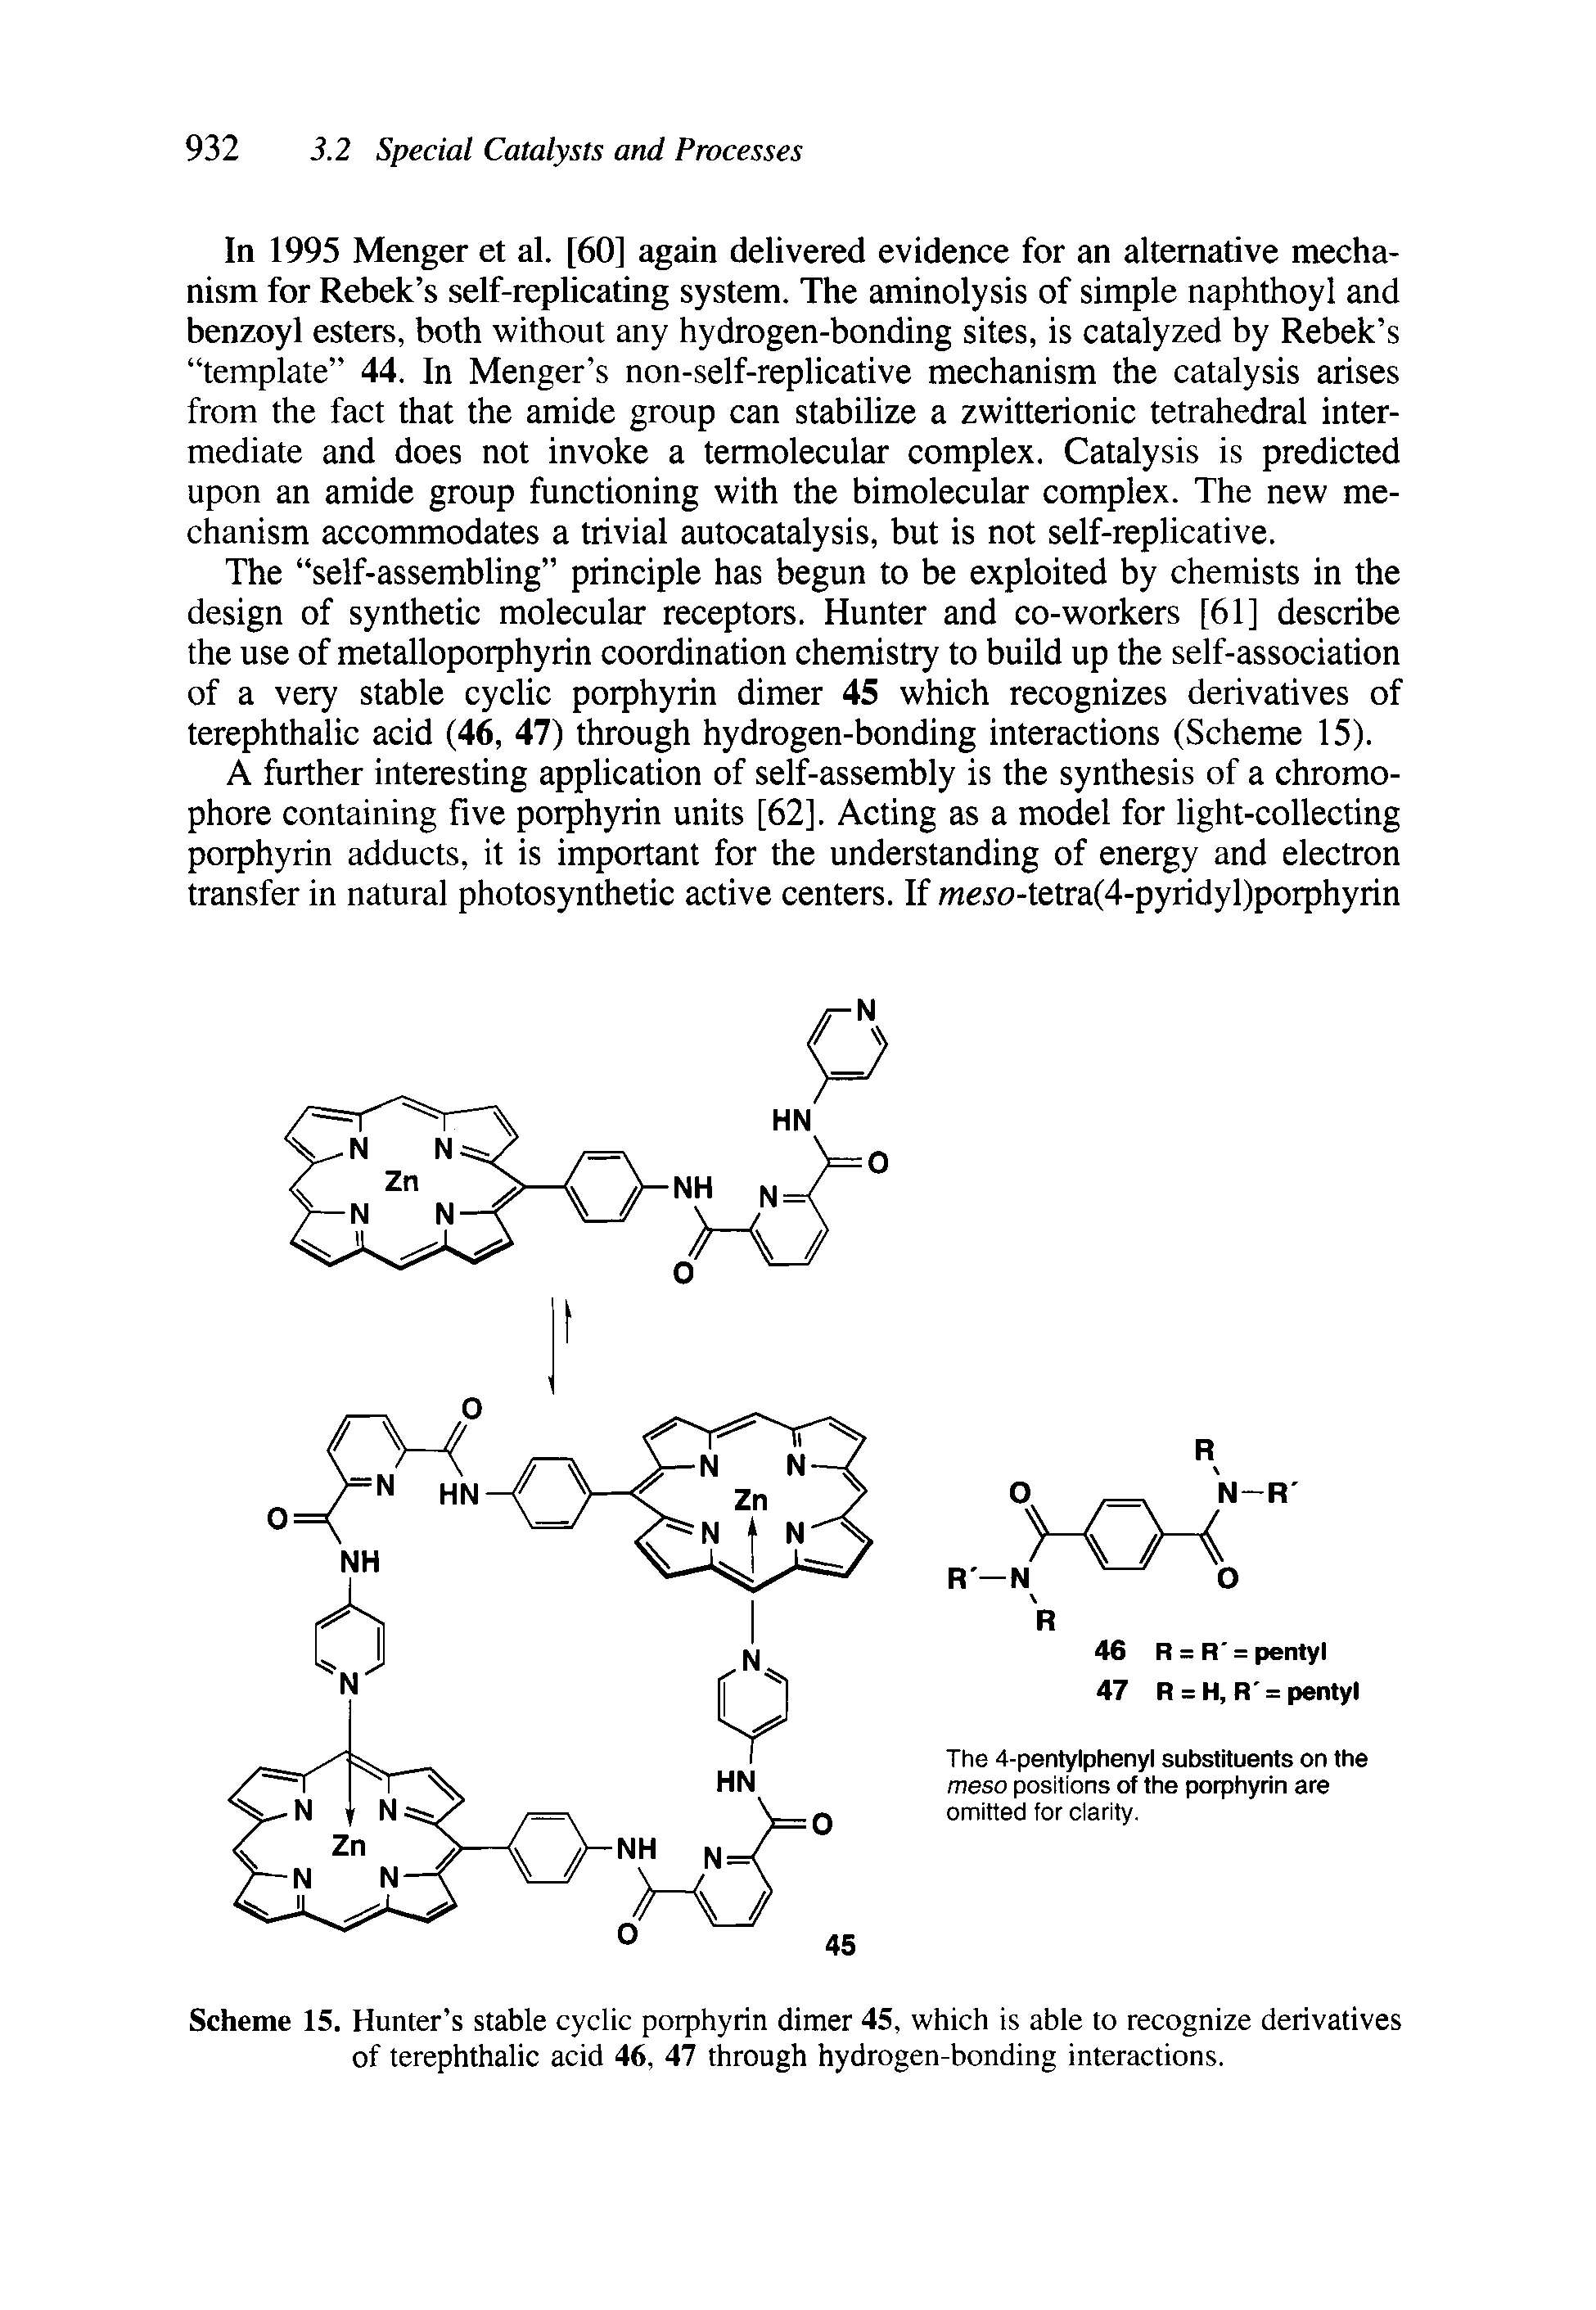 Scheme 15. Hunter s stable cyclic porphyrin dimer 45, which is able to recognize derivatives of terephthalic acid 46, 47 through hydrogen-bonding interactions.